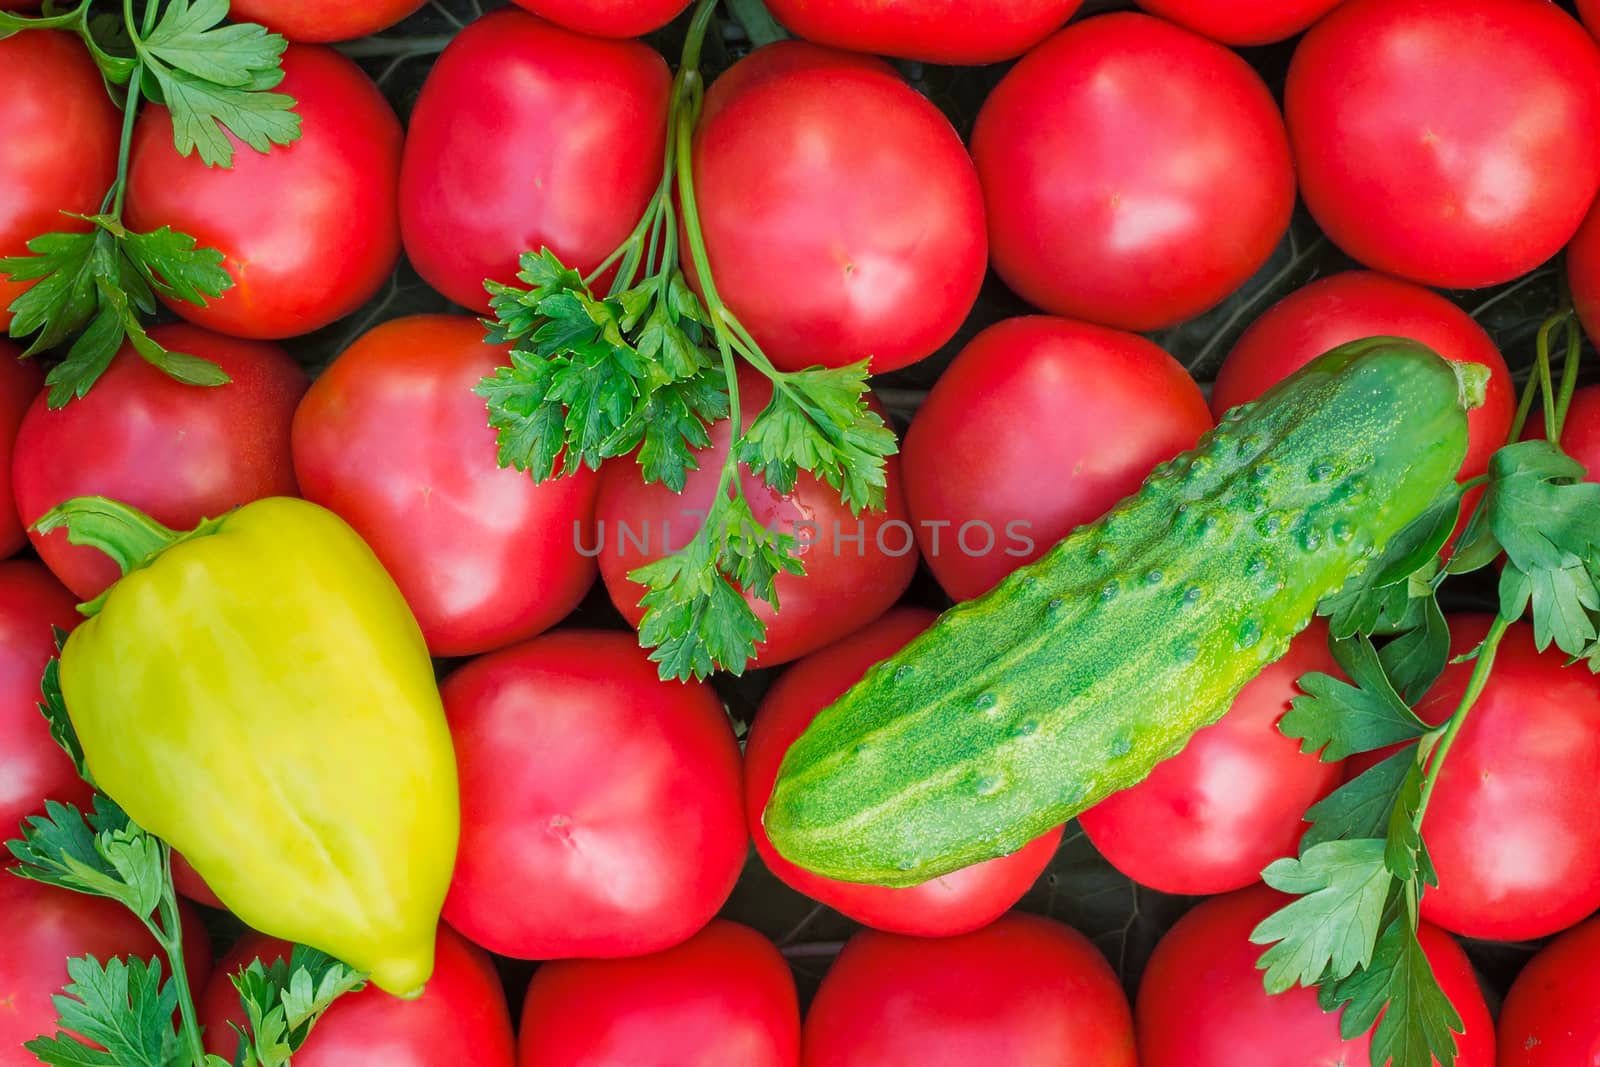 Mature tomatoes of bright red color of the small size, pepper an by georgina198